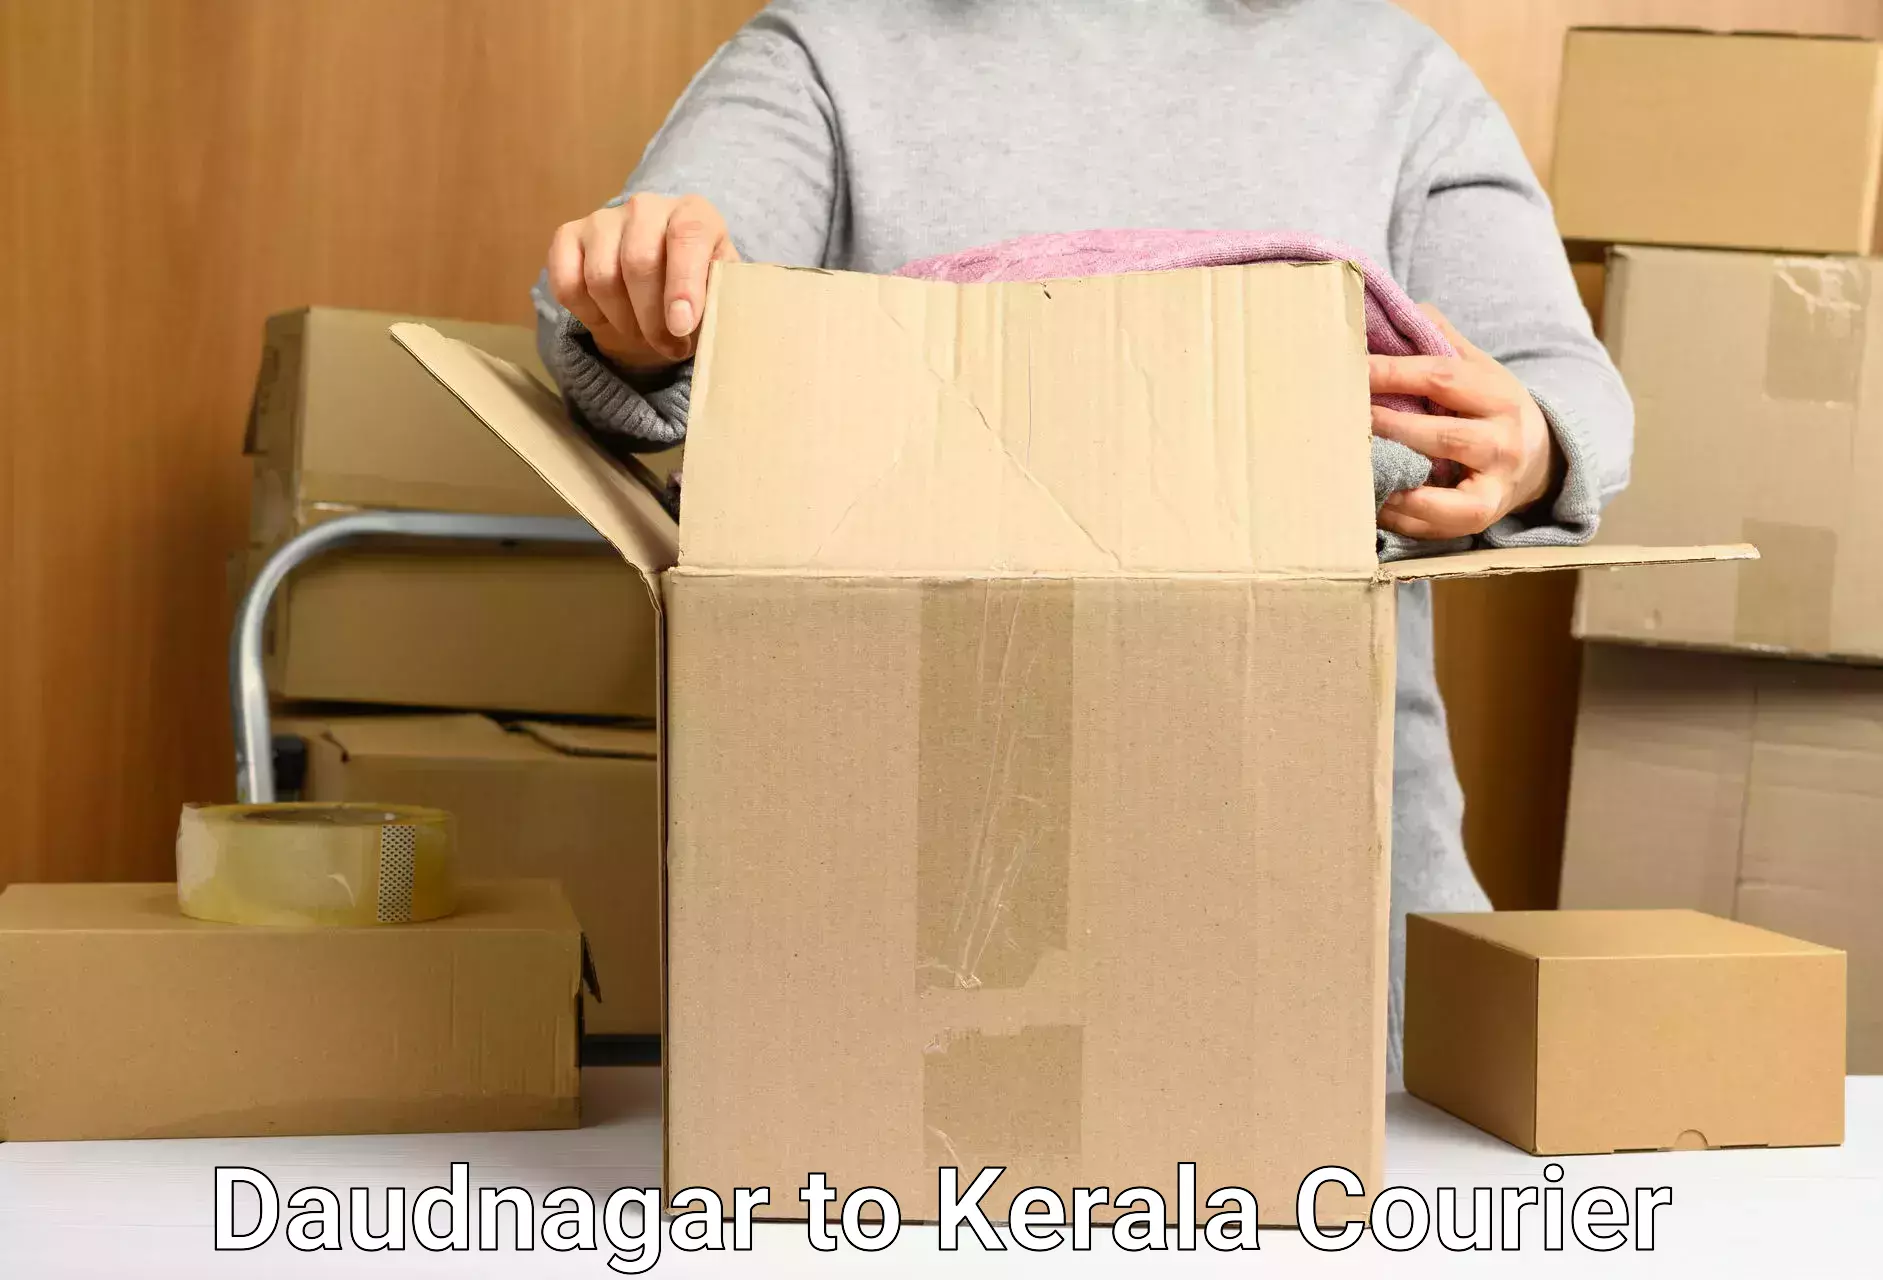 Package delivery network Daudnagar to Angamaly